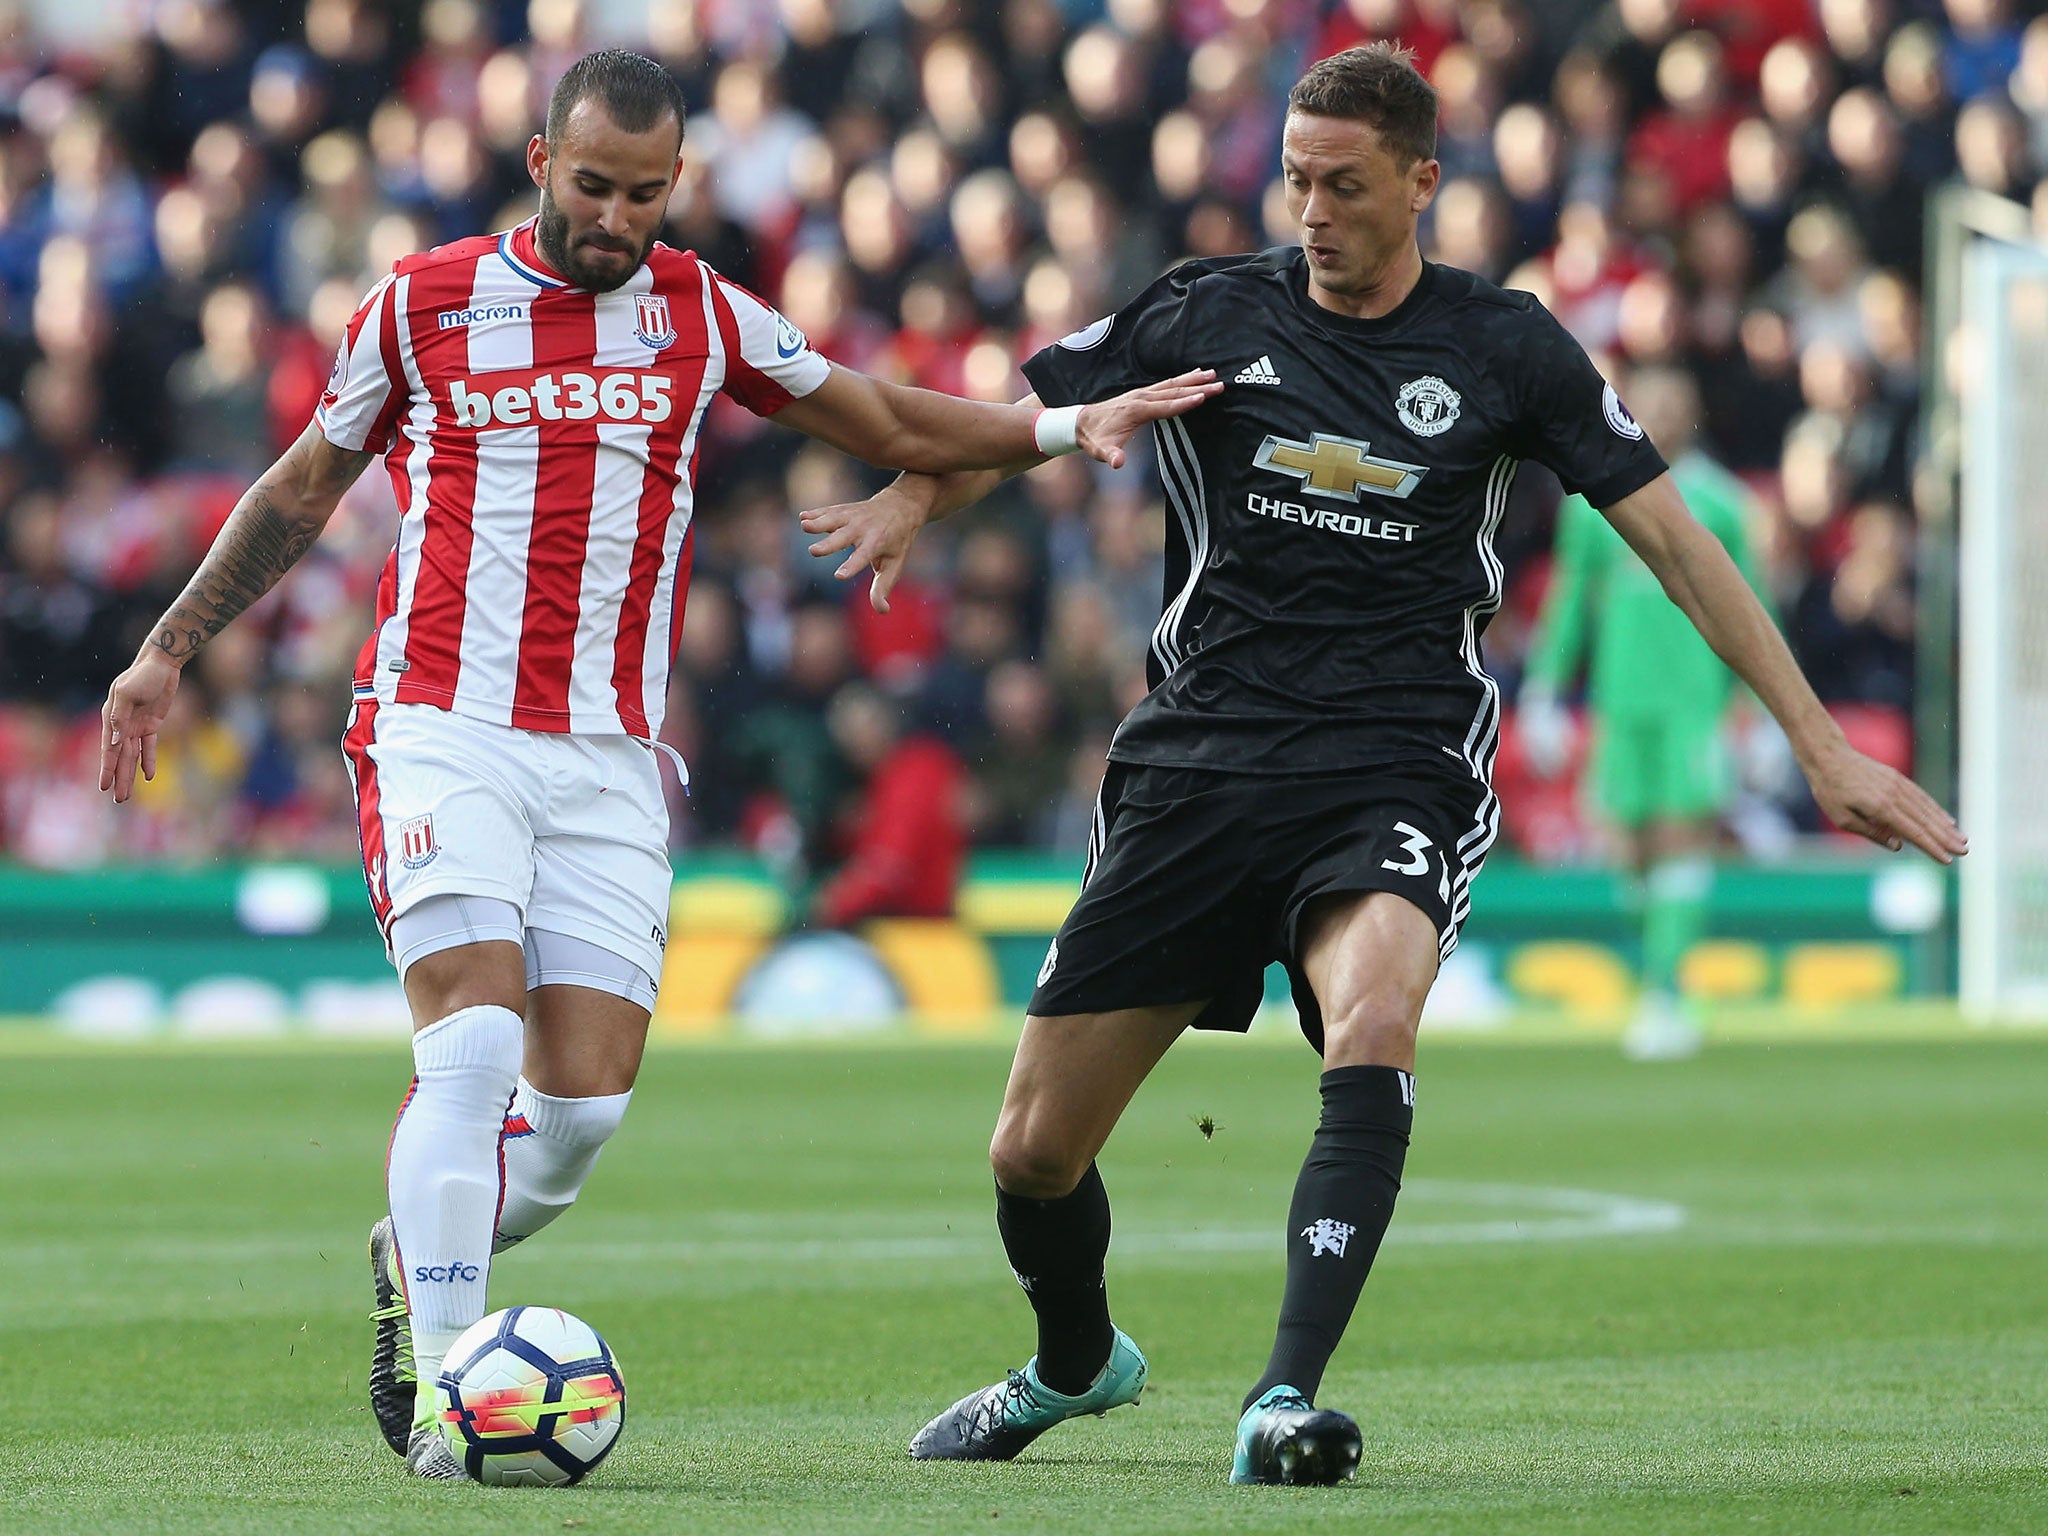 Nemanja Matic attempts to dispossess Jese during Saturday's game